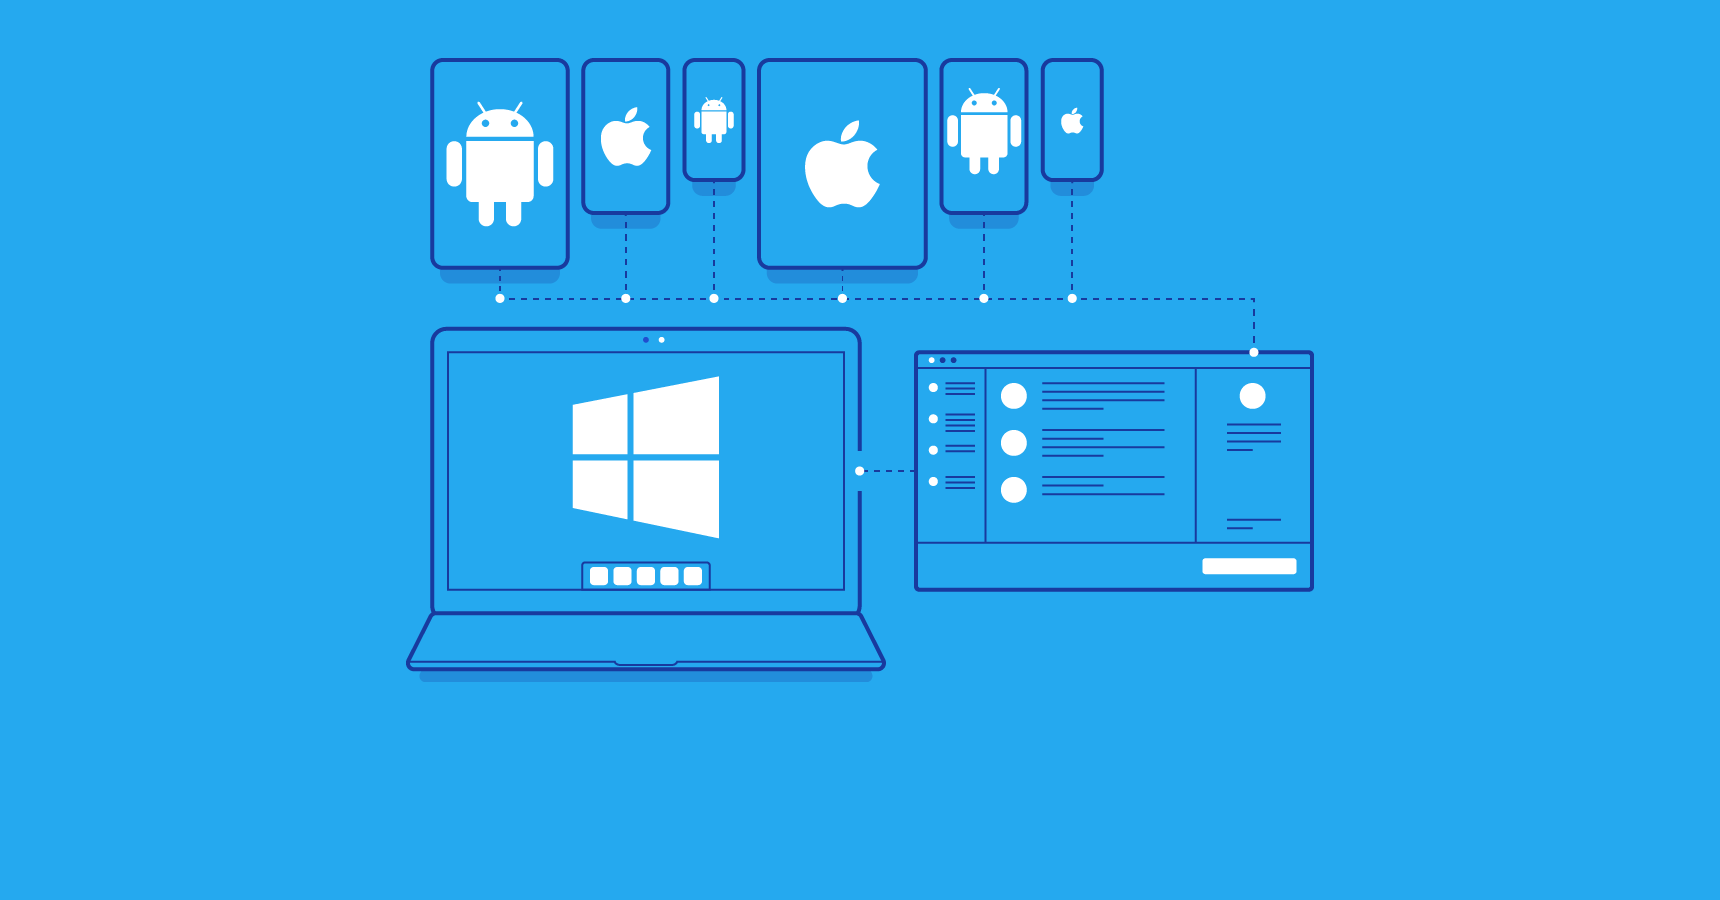 How to Make an Android and iOS App in C# on a Mac